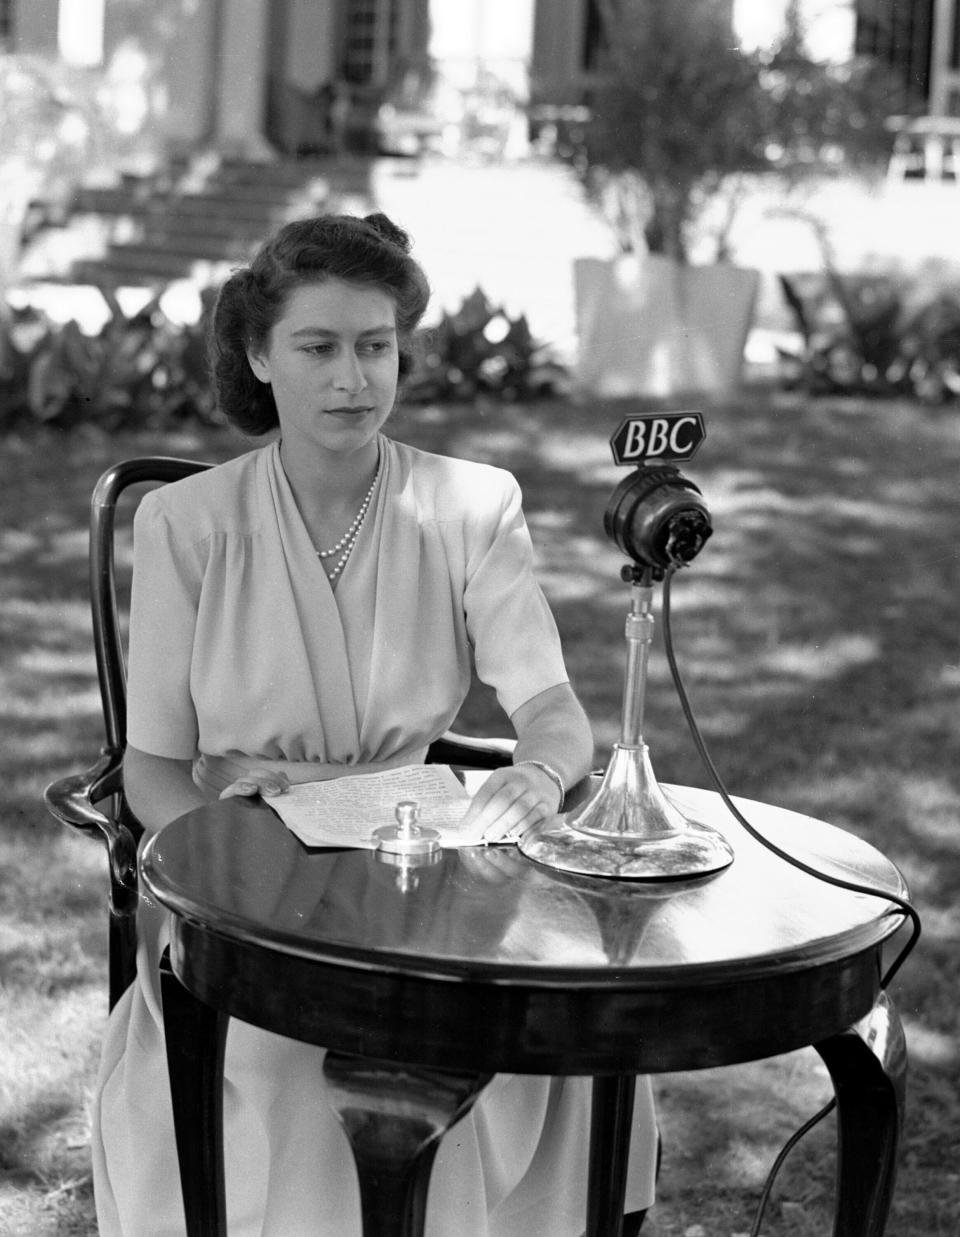 FILE - Britain's Princess Elizabeth, later Queen Elizabeth II, poses in front of a microphone to make a 21st Birthday speech, April 21, 1947, which she made from Cape Town, South Africa. Queen Elizabeth II will mark 70 years on the throne Sunday, Feb. 6, 2022, an unprecedented reign that has made her a symbol of stability as the United Kingdom navigated an age of uncertainty. (AP Photo, File)